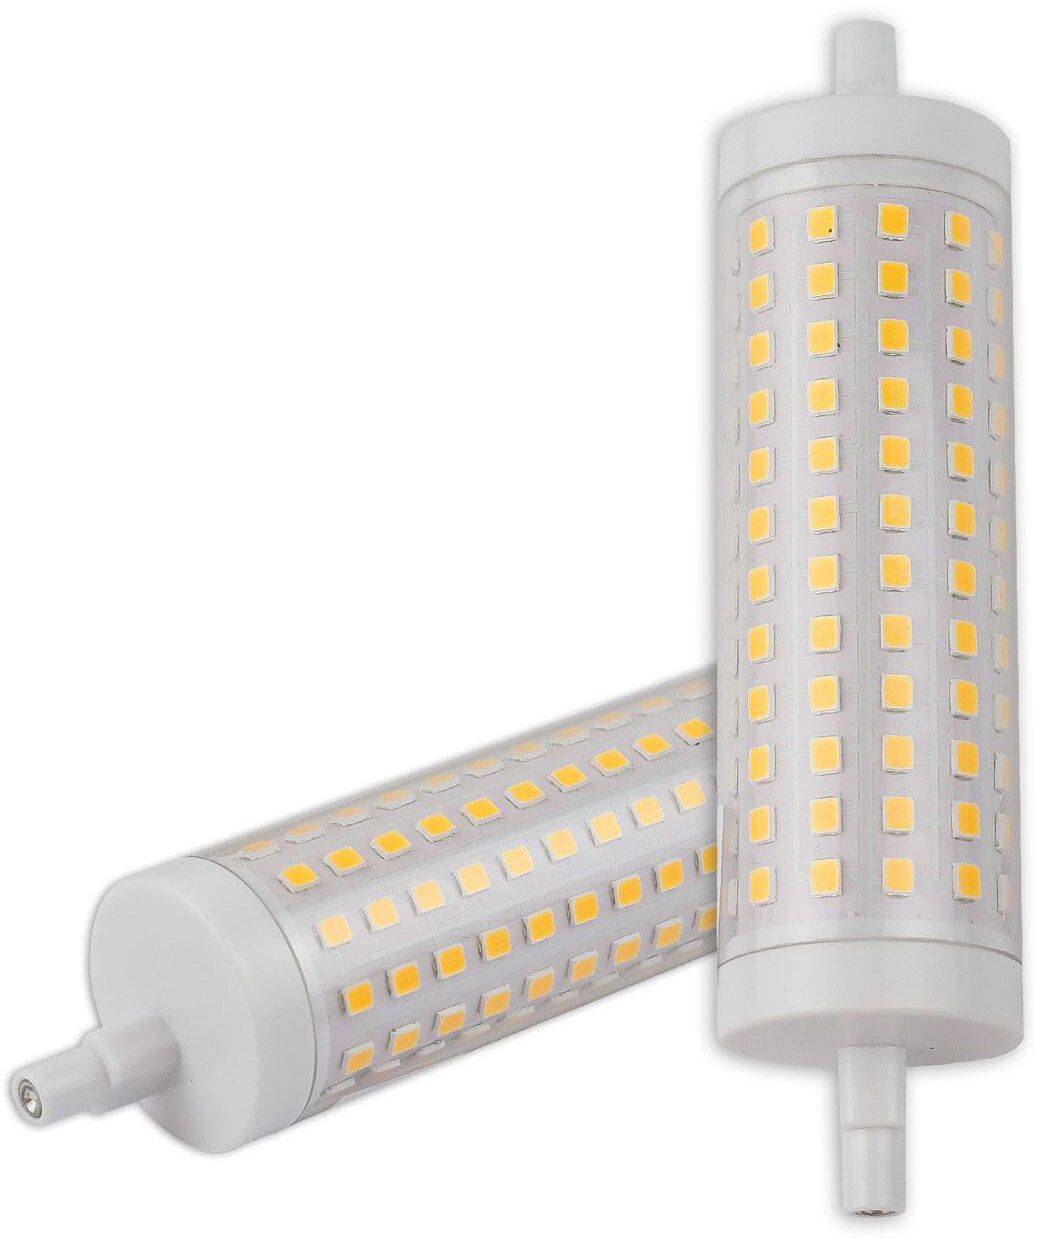 ISOLED R7s LED tige, 14W, L : 118mm, blanc chaud, dimmable - Lampes LED socle R7s